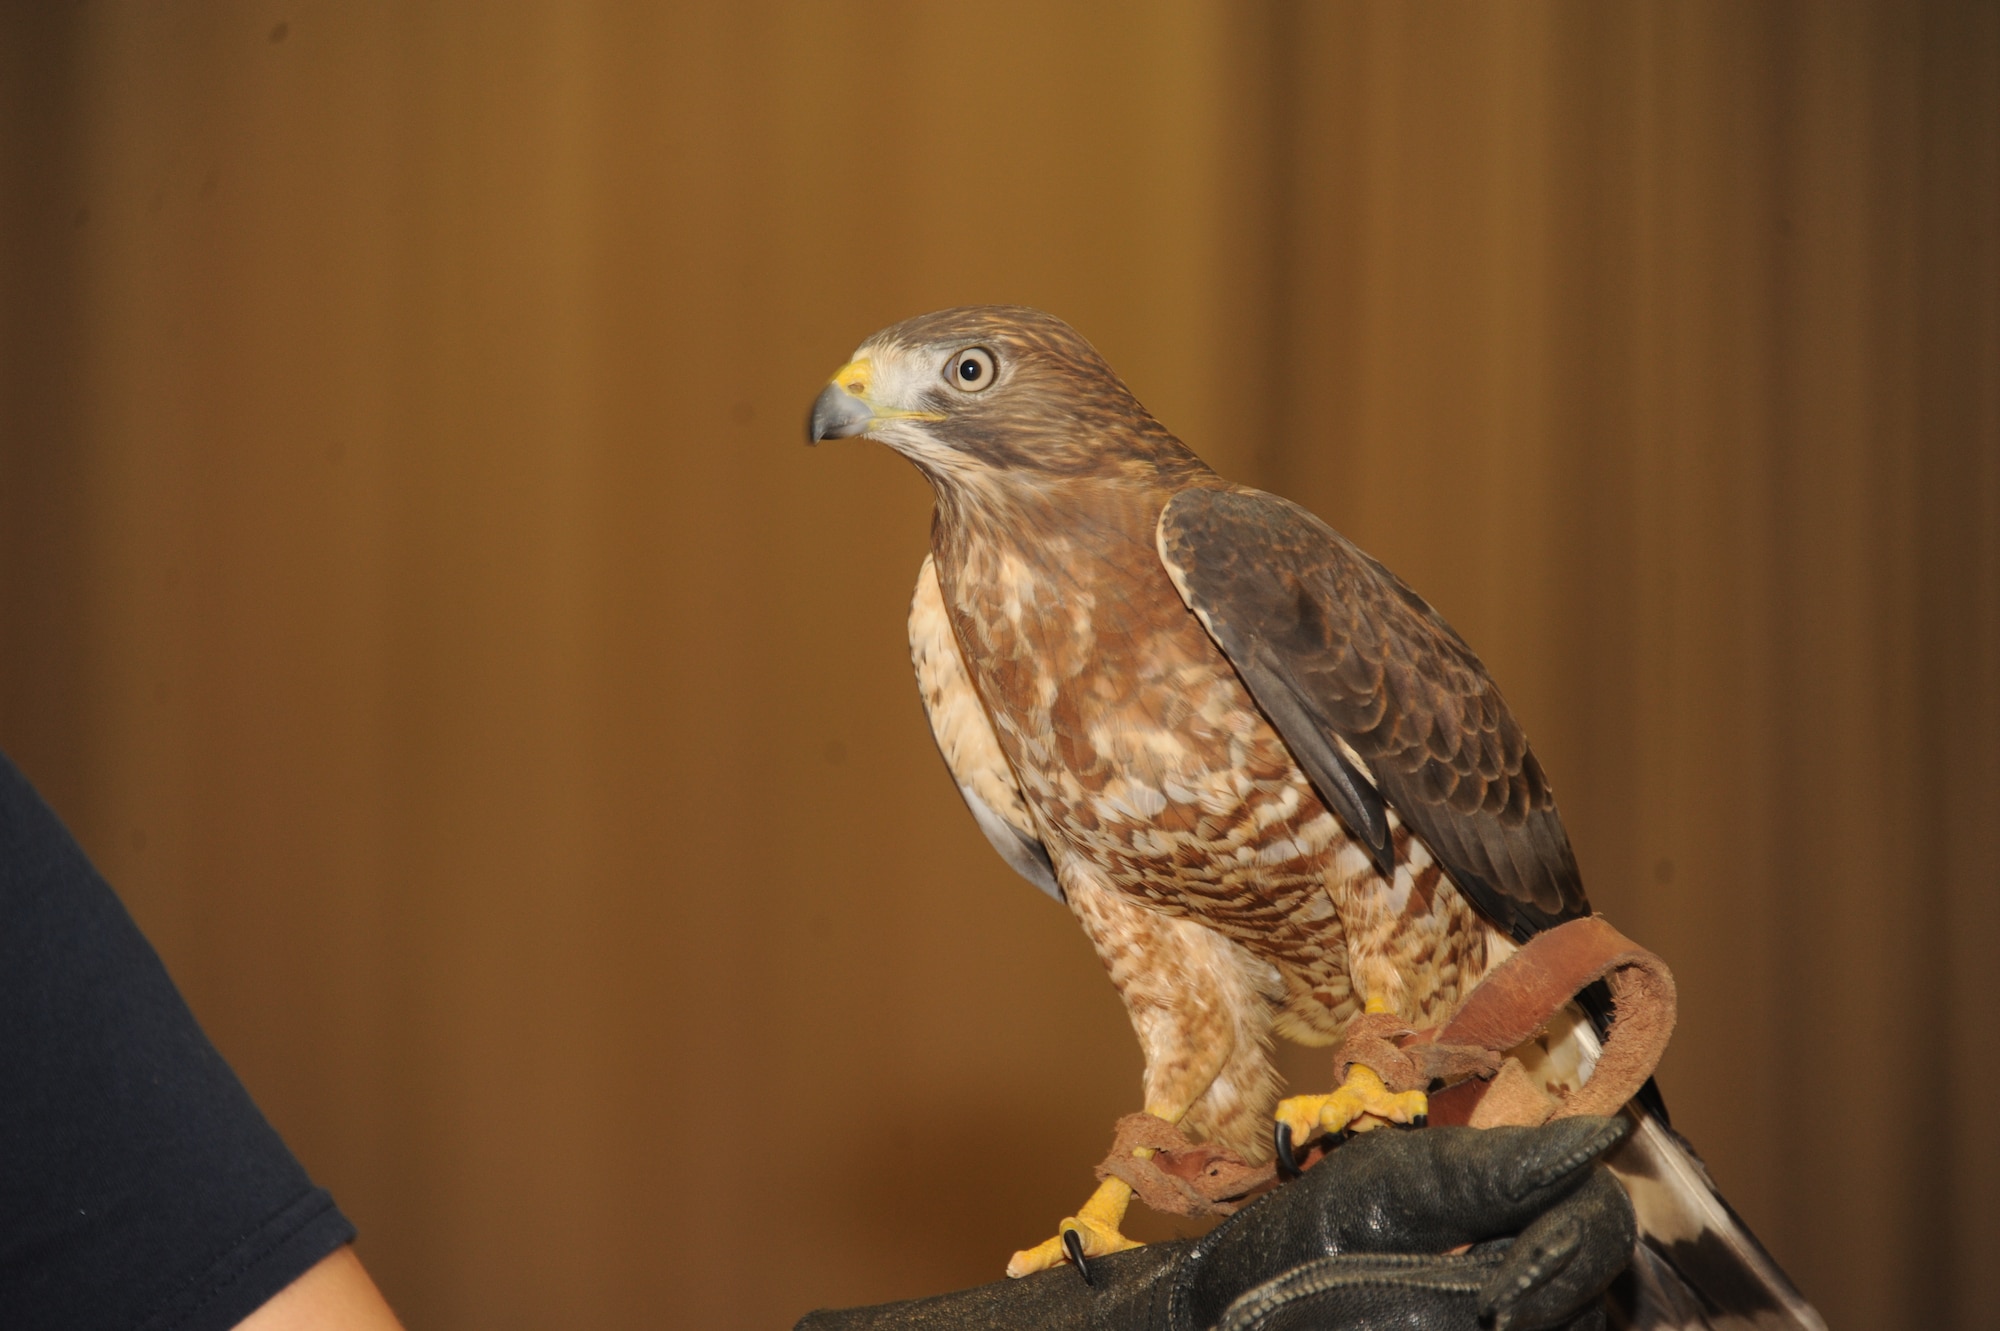 Costa, the Broad Winged Hawk, perches on the hand of its handler, Alejandra Palacio, Alabama 4-H Science School environmental educational instructor during the Birds of Prey demonstration April 8, 2016, at Maxwell Air Force Base, Alabama. (U.S. Air Force photo by Airman 1st Class Alexa Culbert)